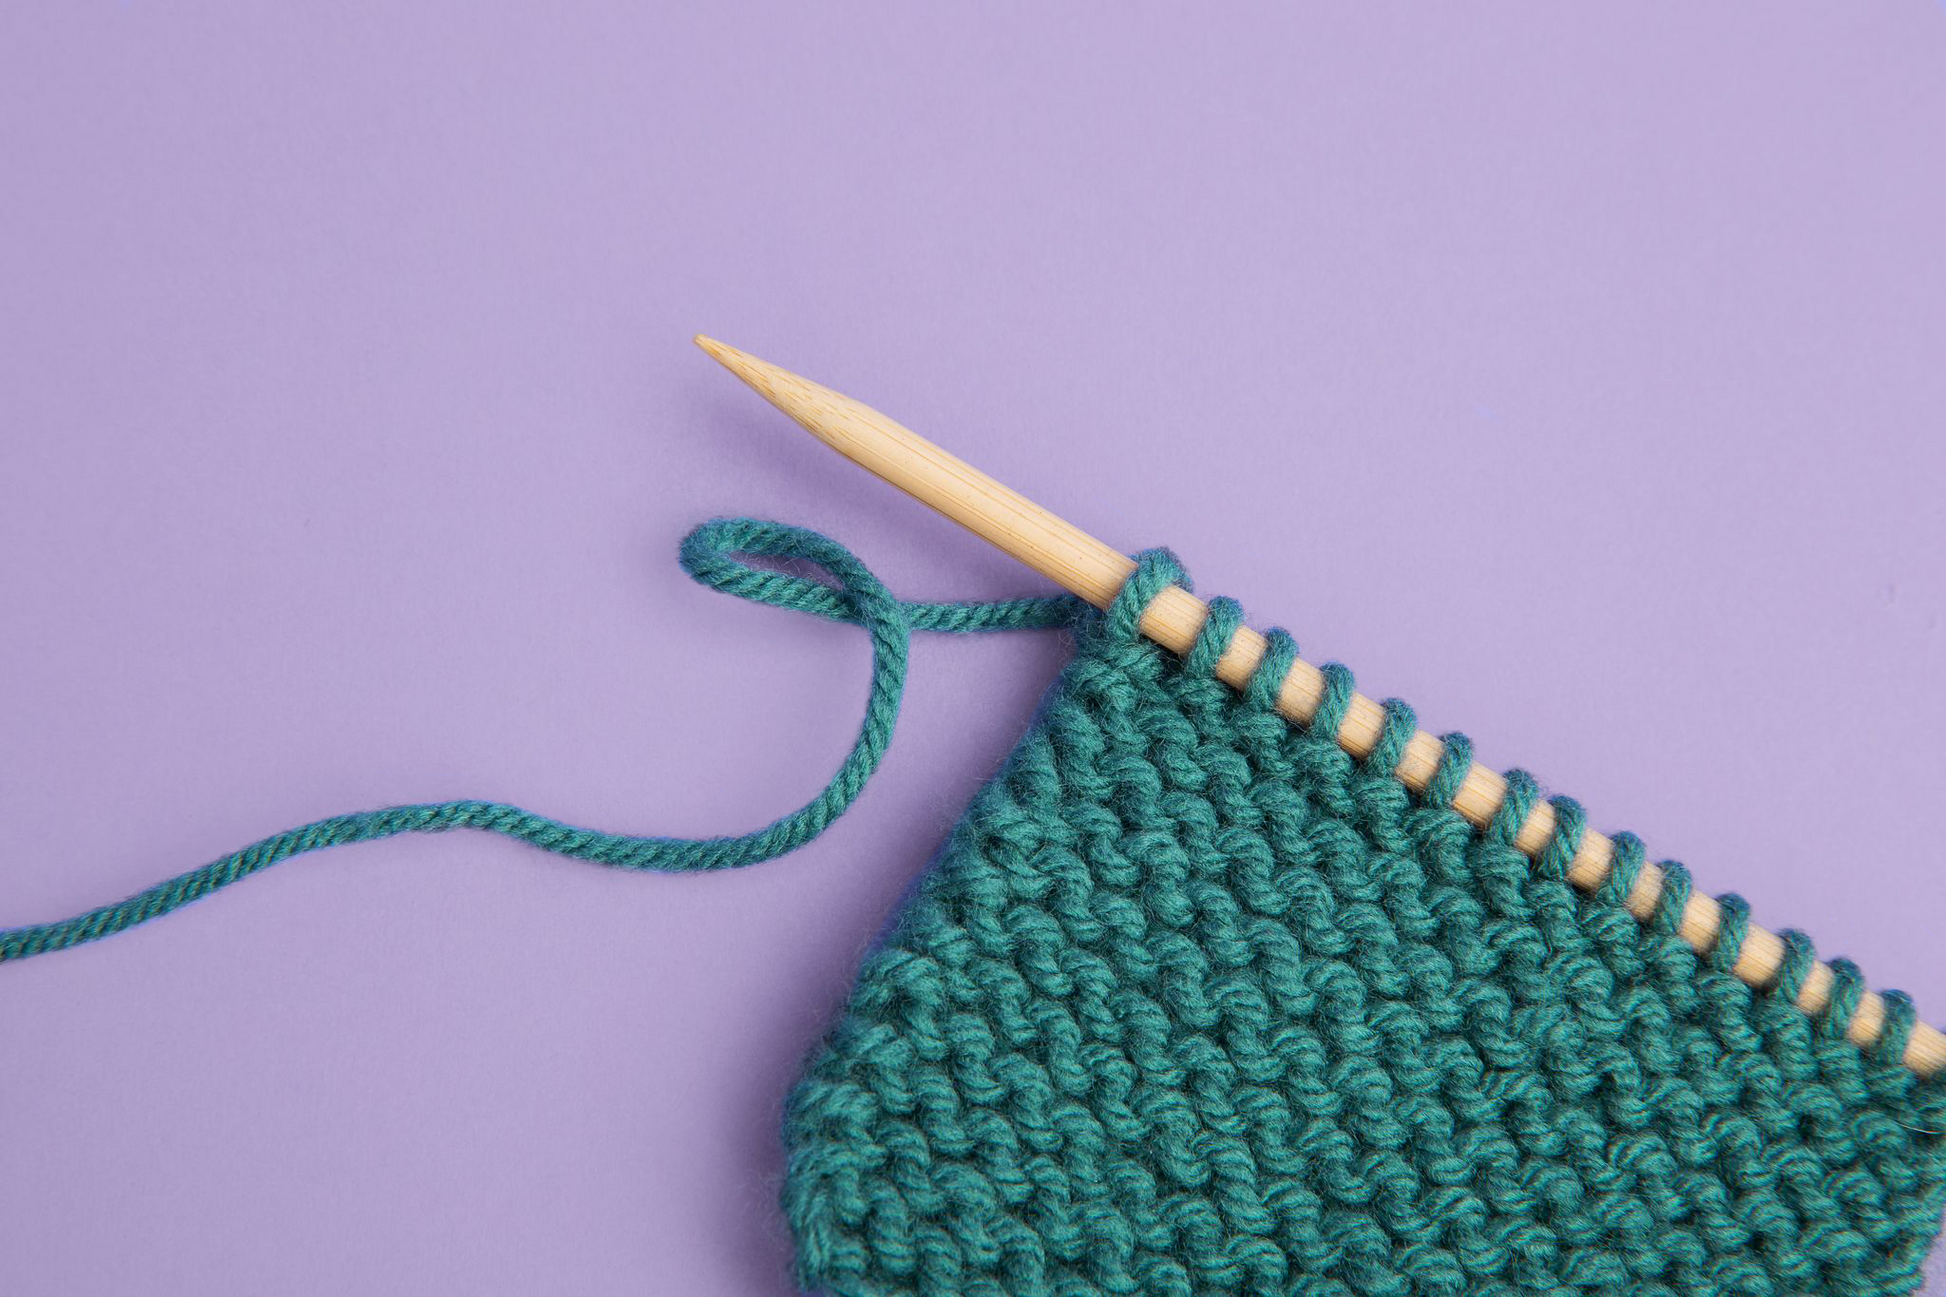 Learn to Knit Kit : Includes Needles and Yarn for Practice and for Making  Your First Scarf-Featuring a 32-Page Book with Instructions and a Project